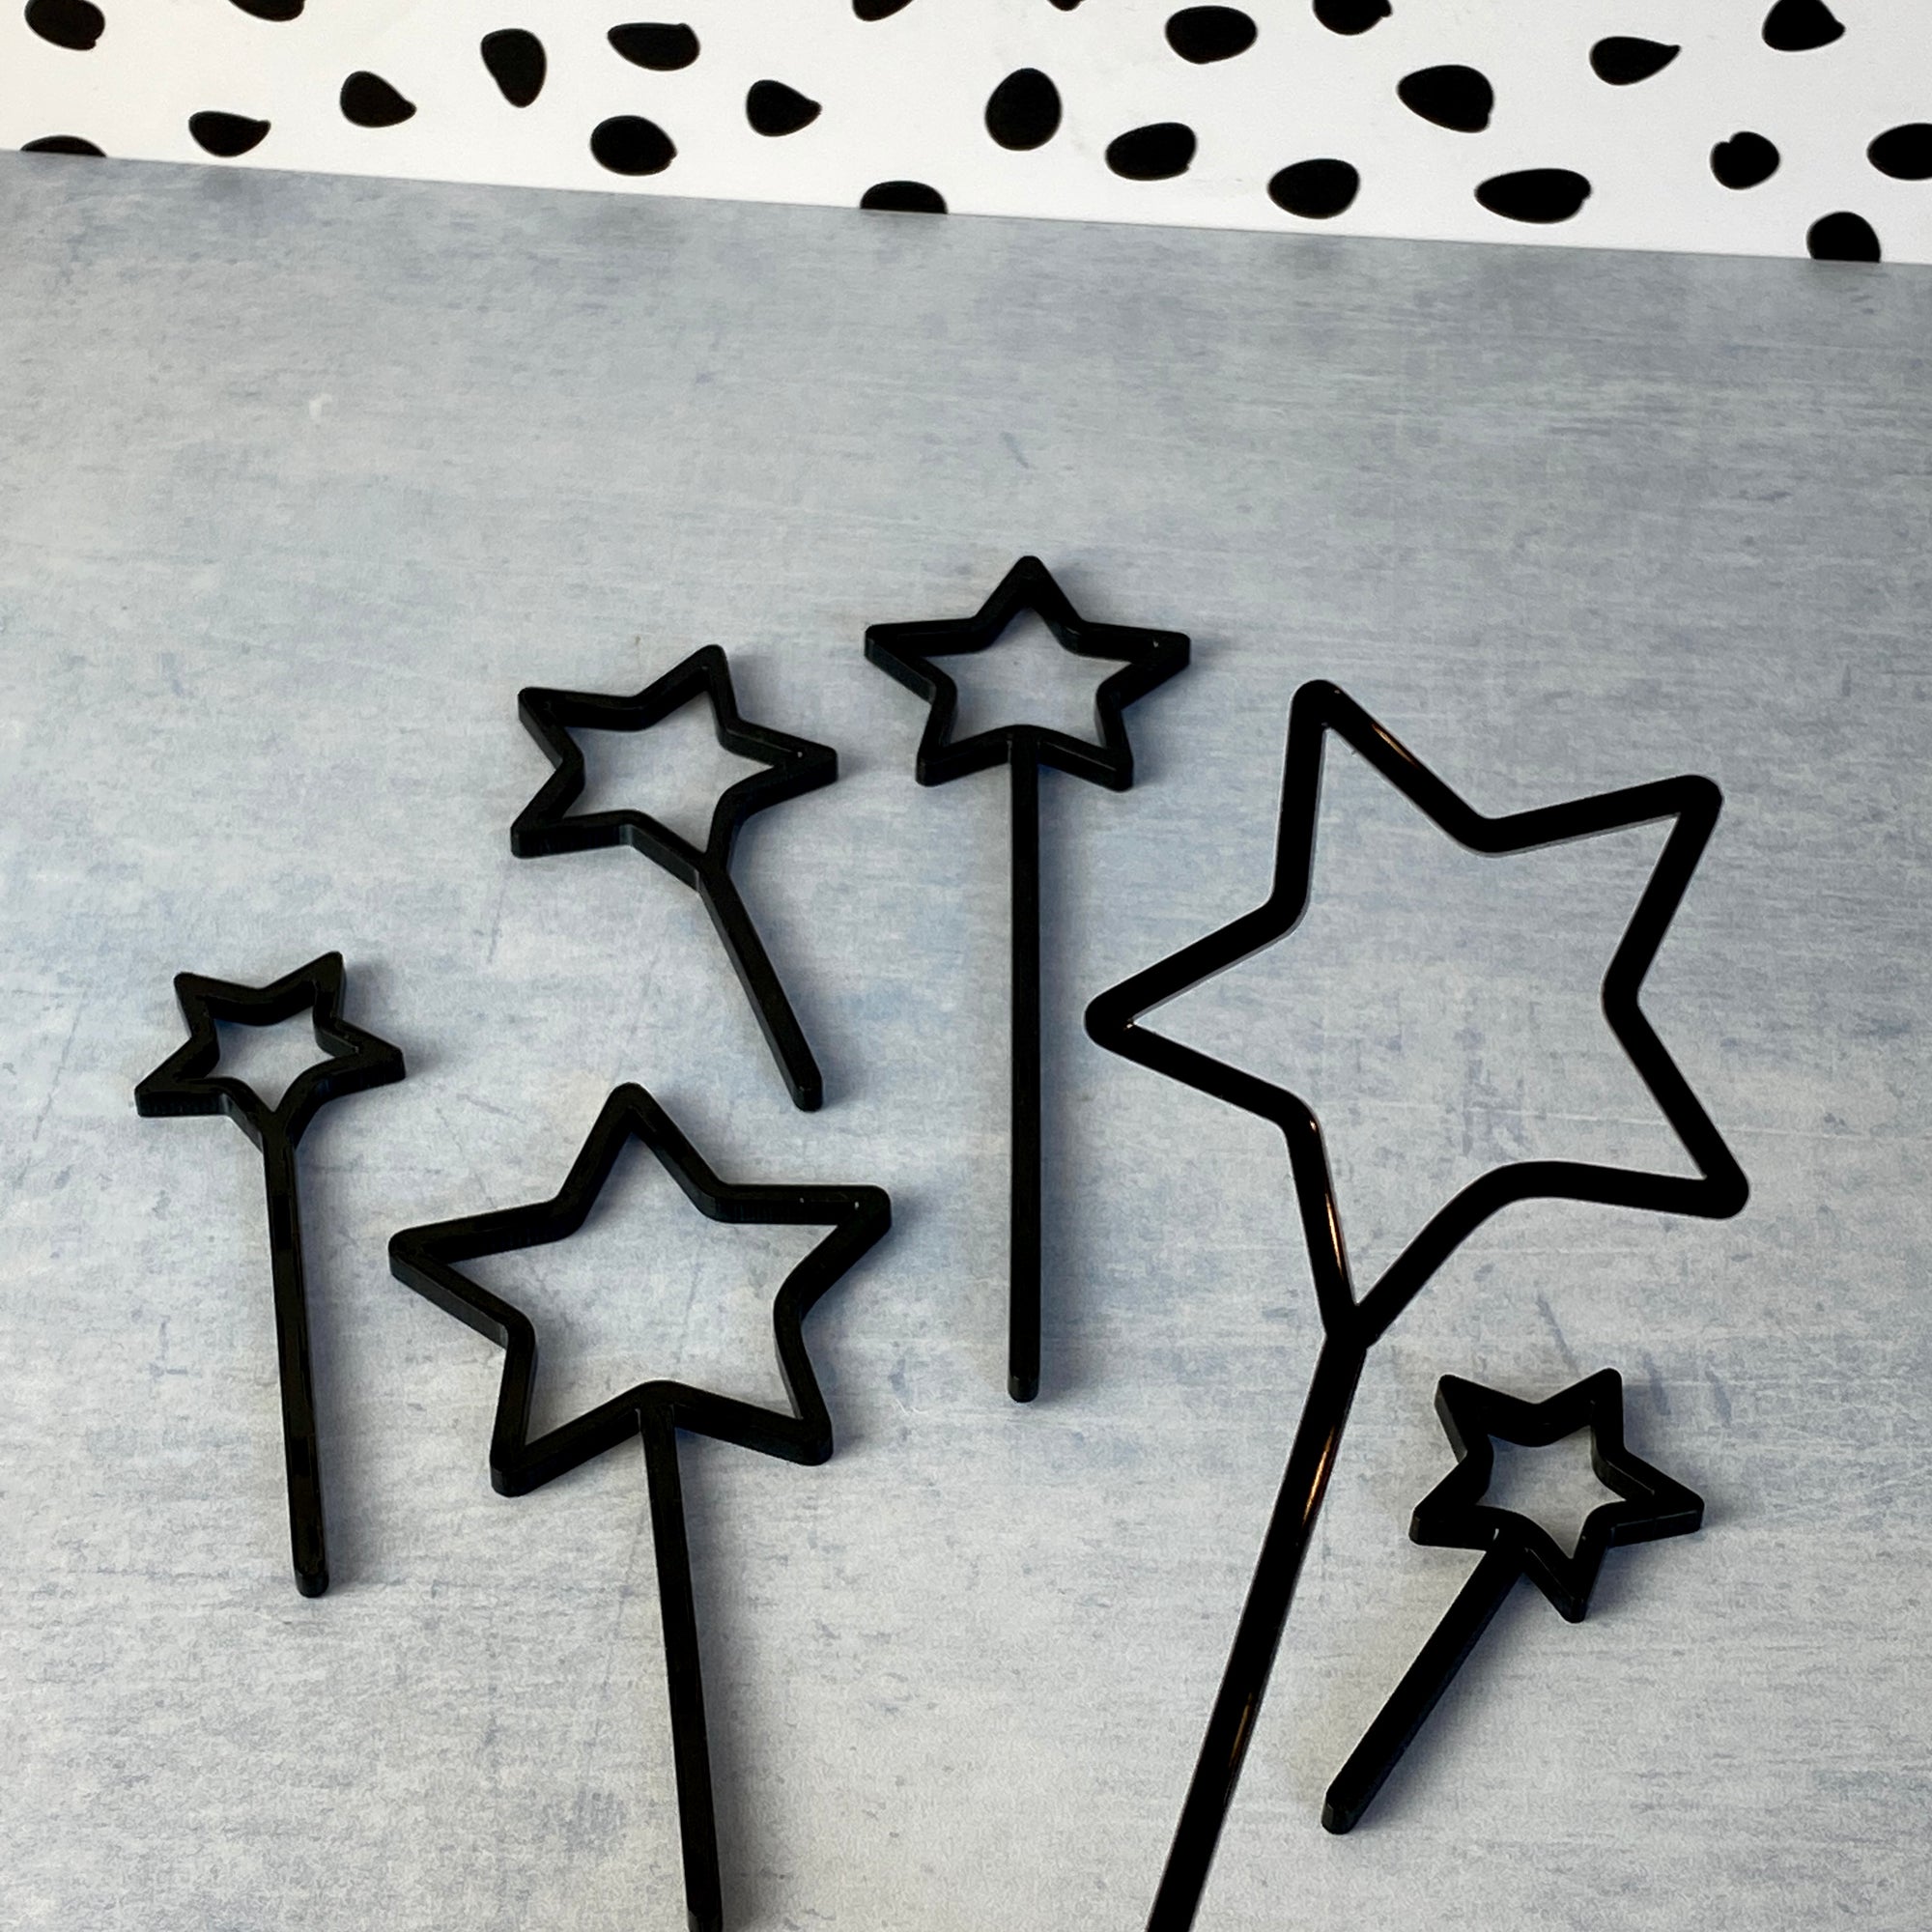 Star Outline Cake Toppers - 6 Pack